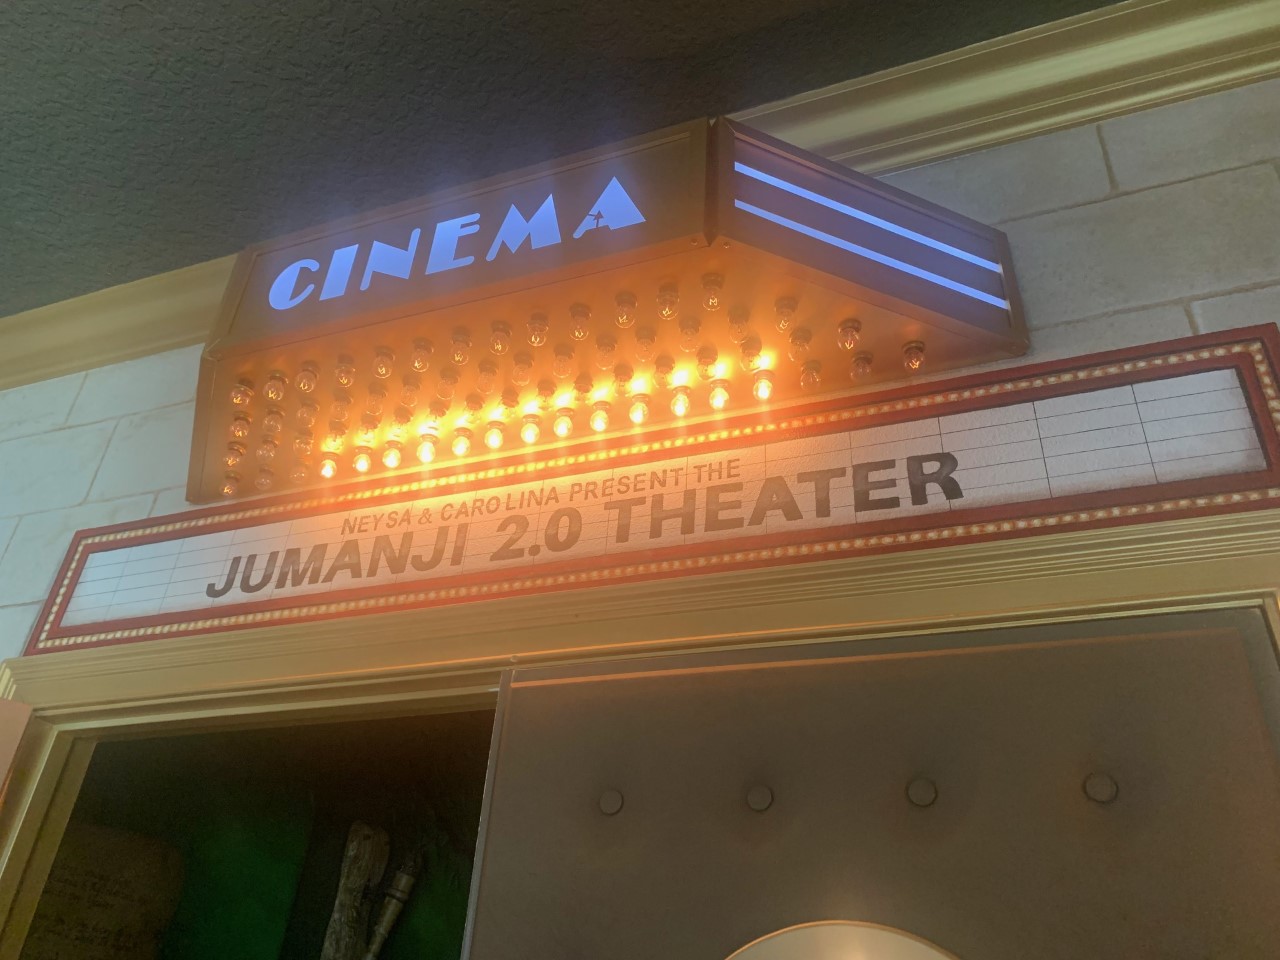 In-house Jumanji 2.0 Theater located at Great Escape Parkside